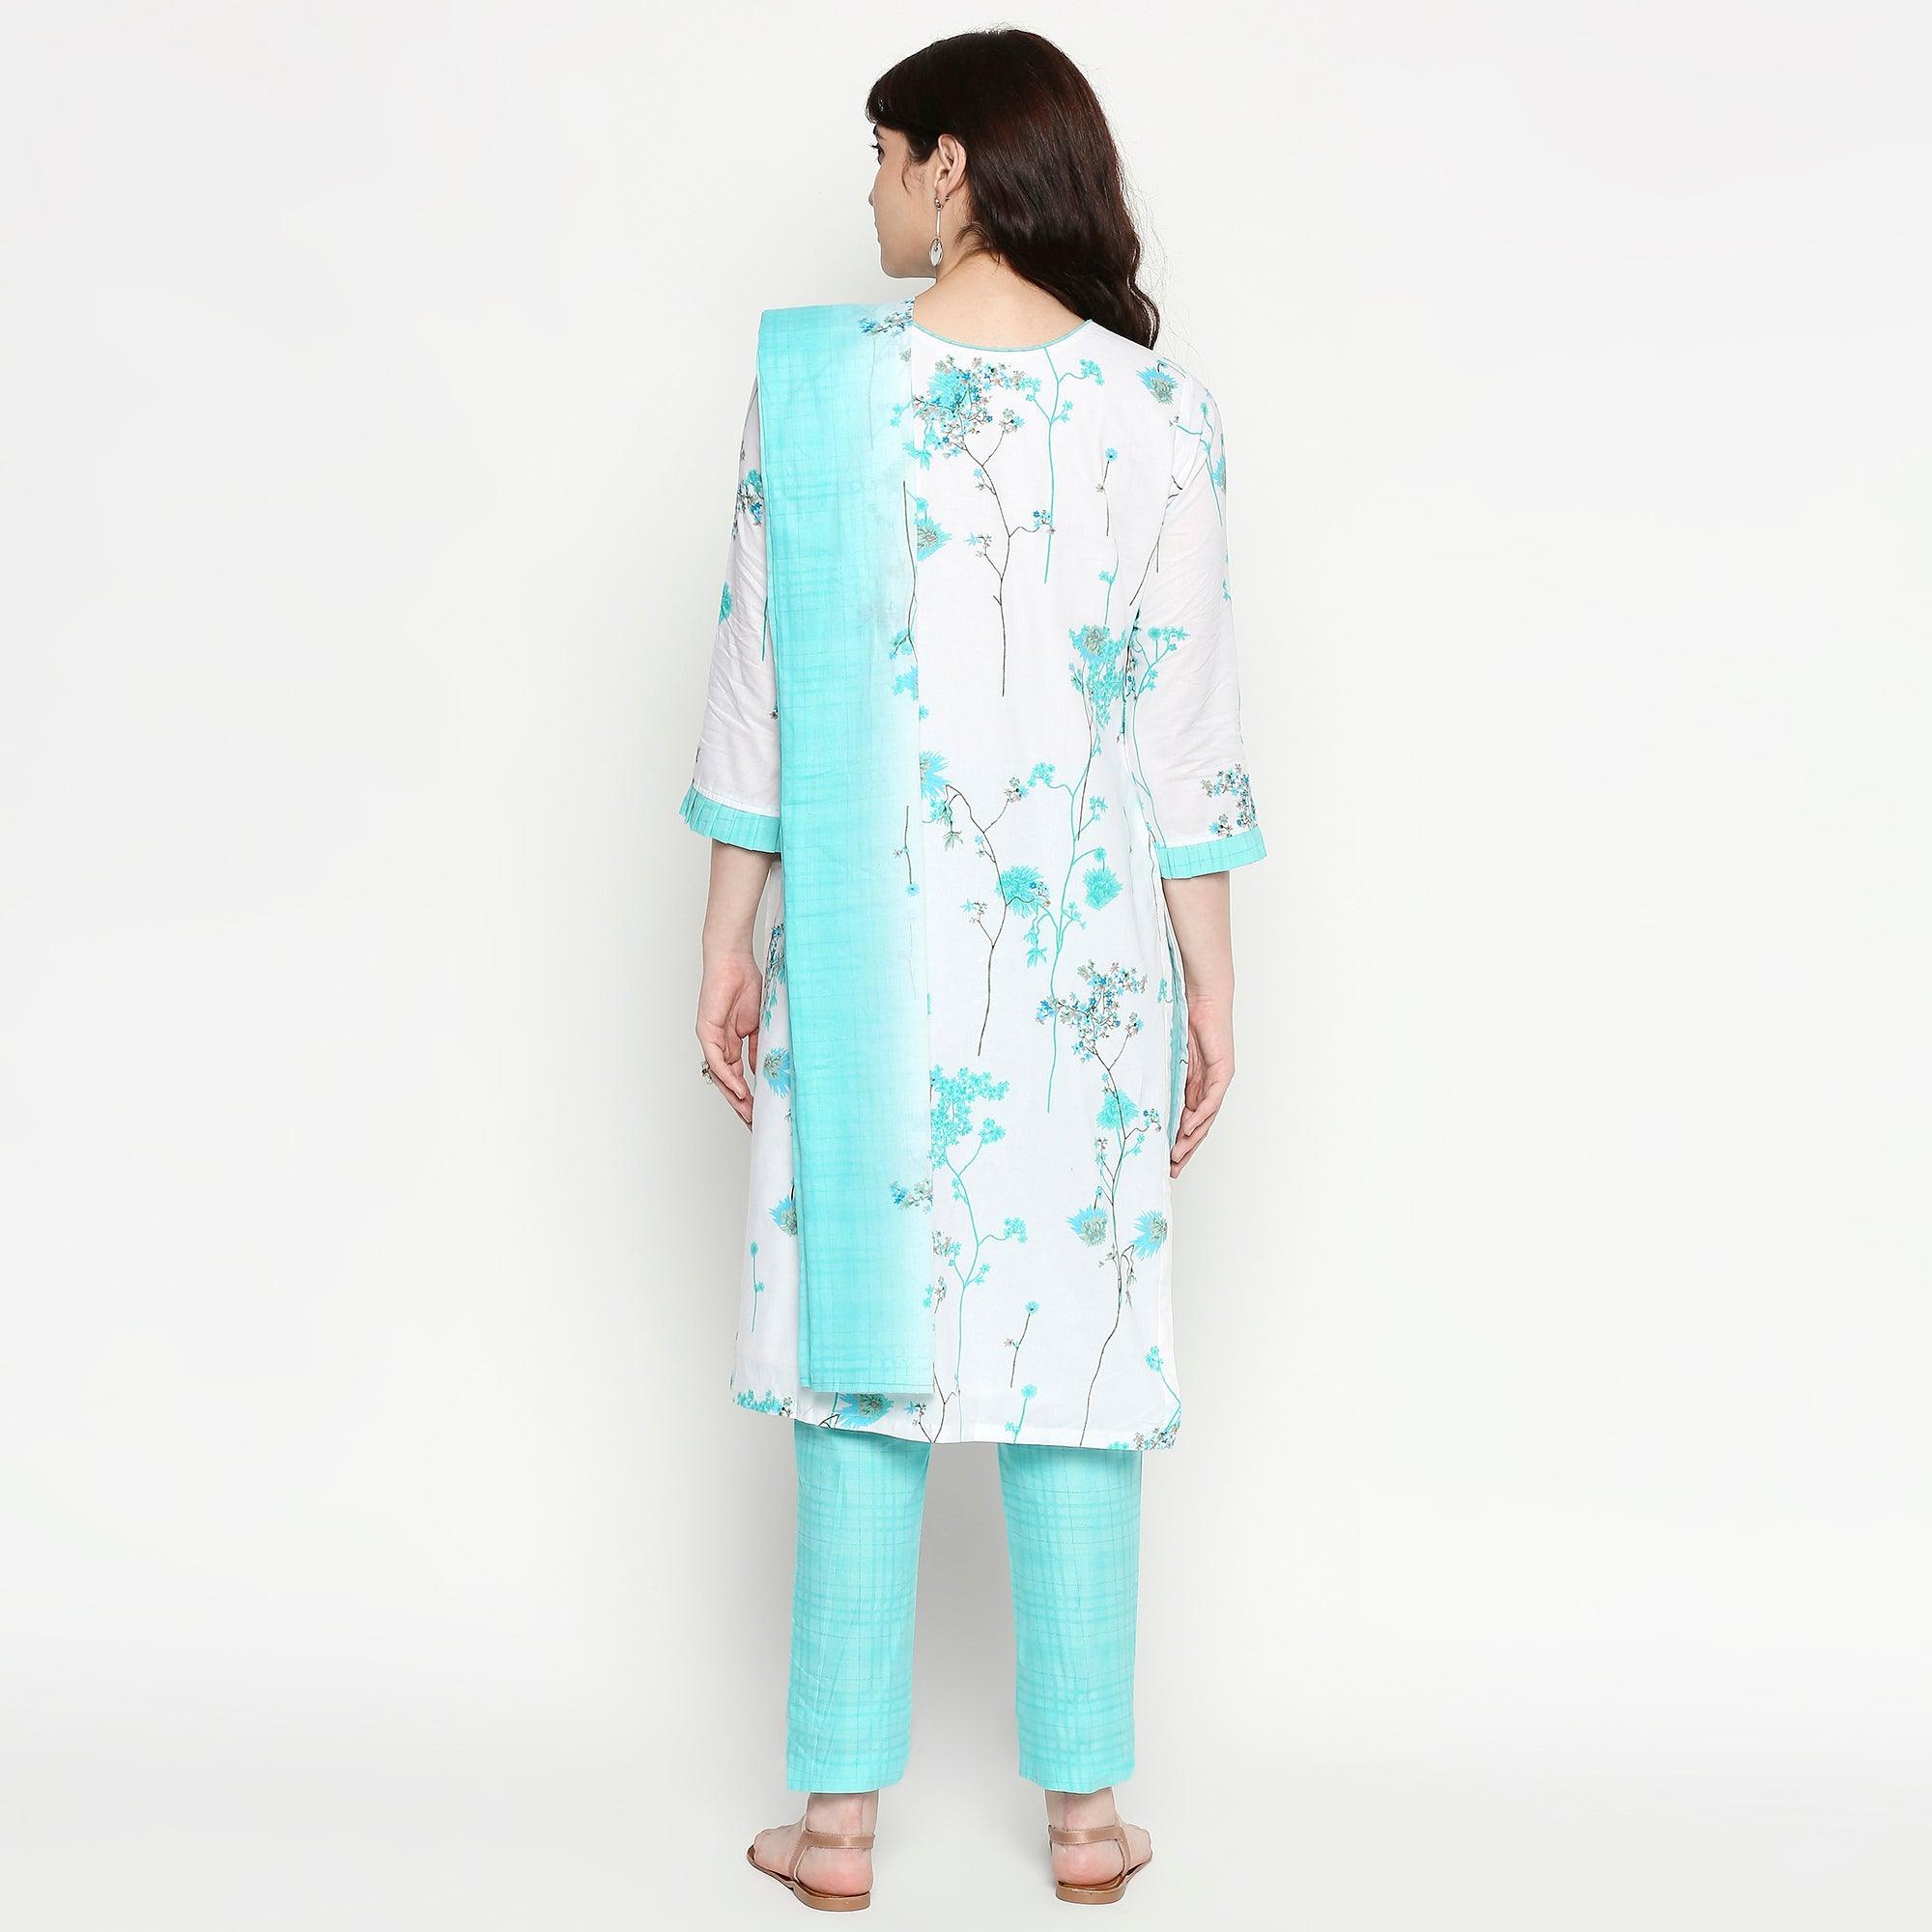 Graceful White-Blue Colored Casual Wear Floral Printed Cotton Kurti-Pant Set With Dupatta - Peachmode